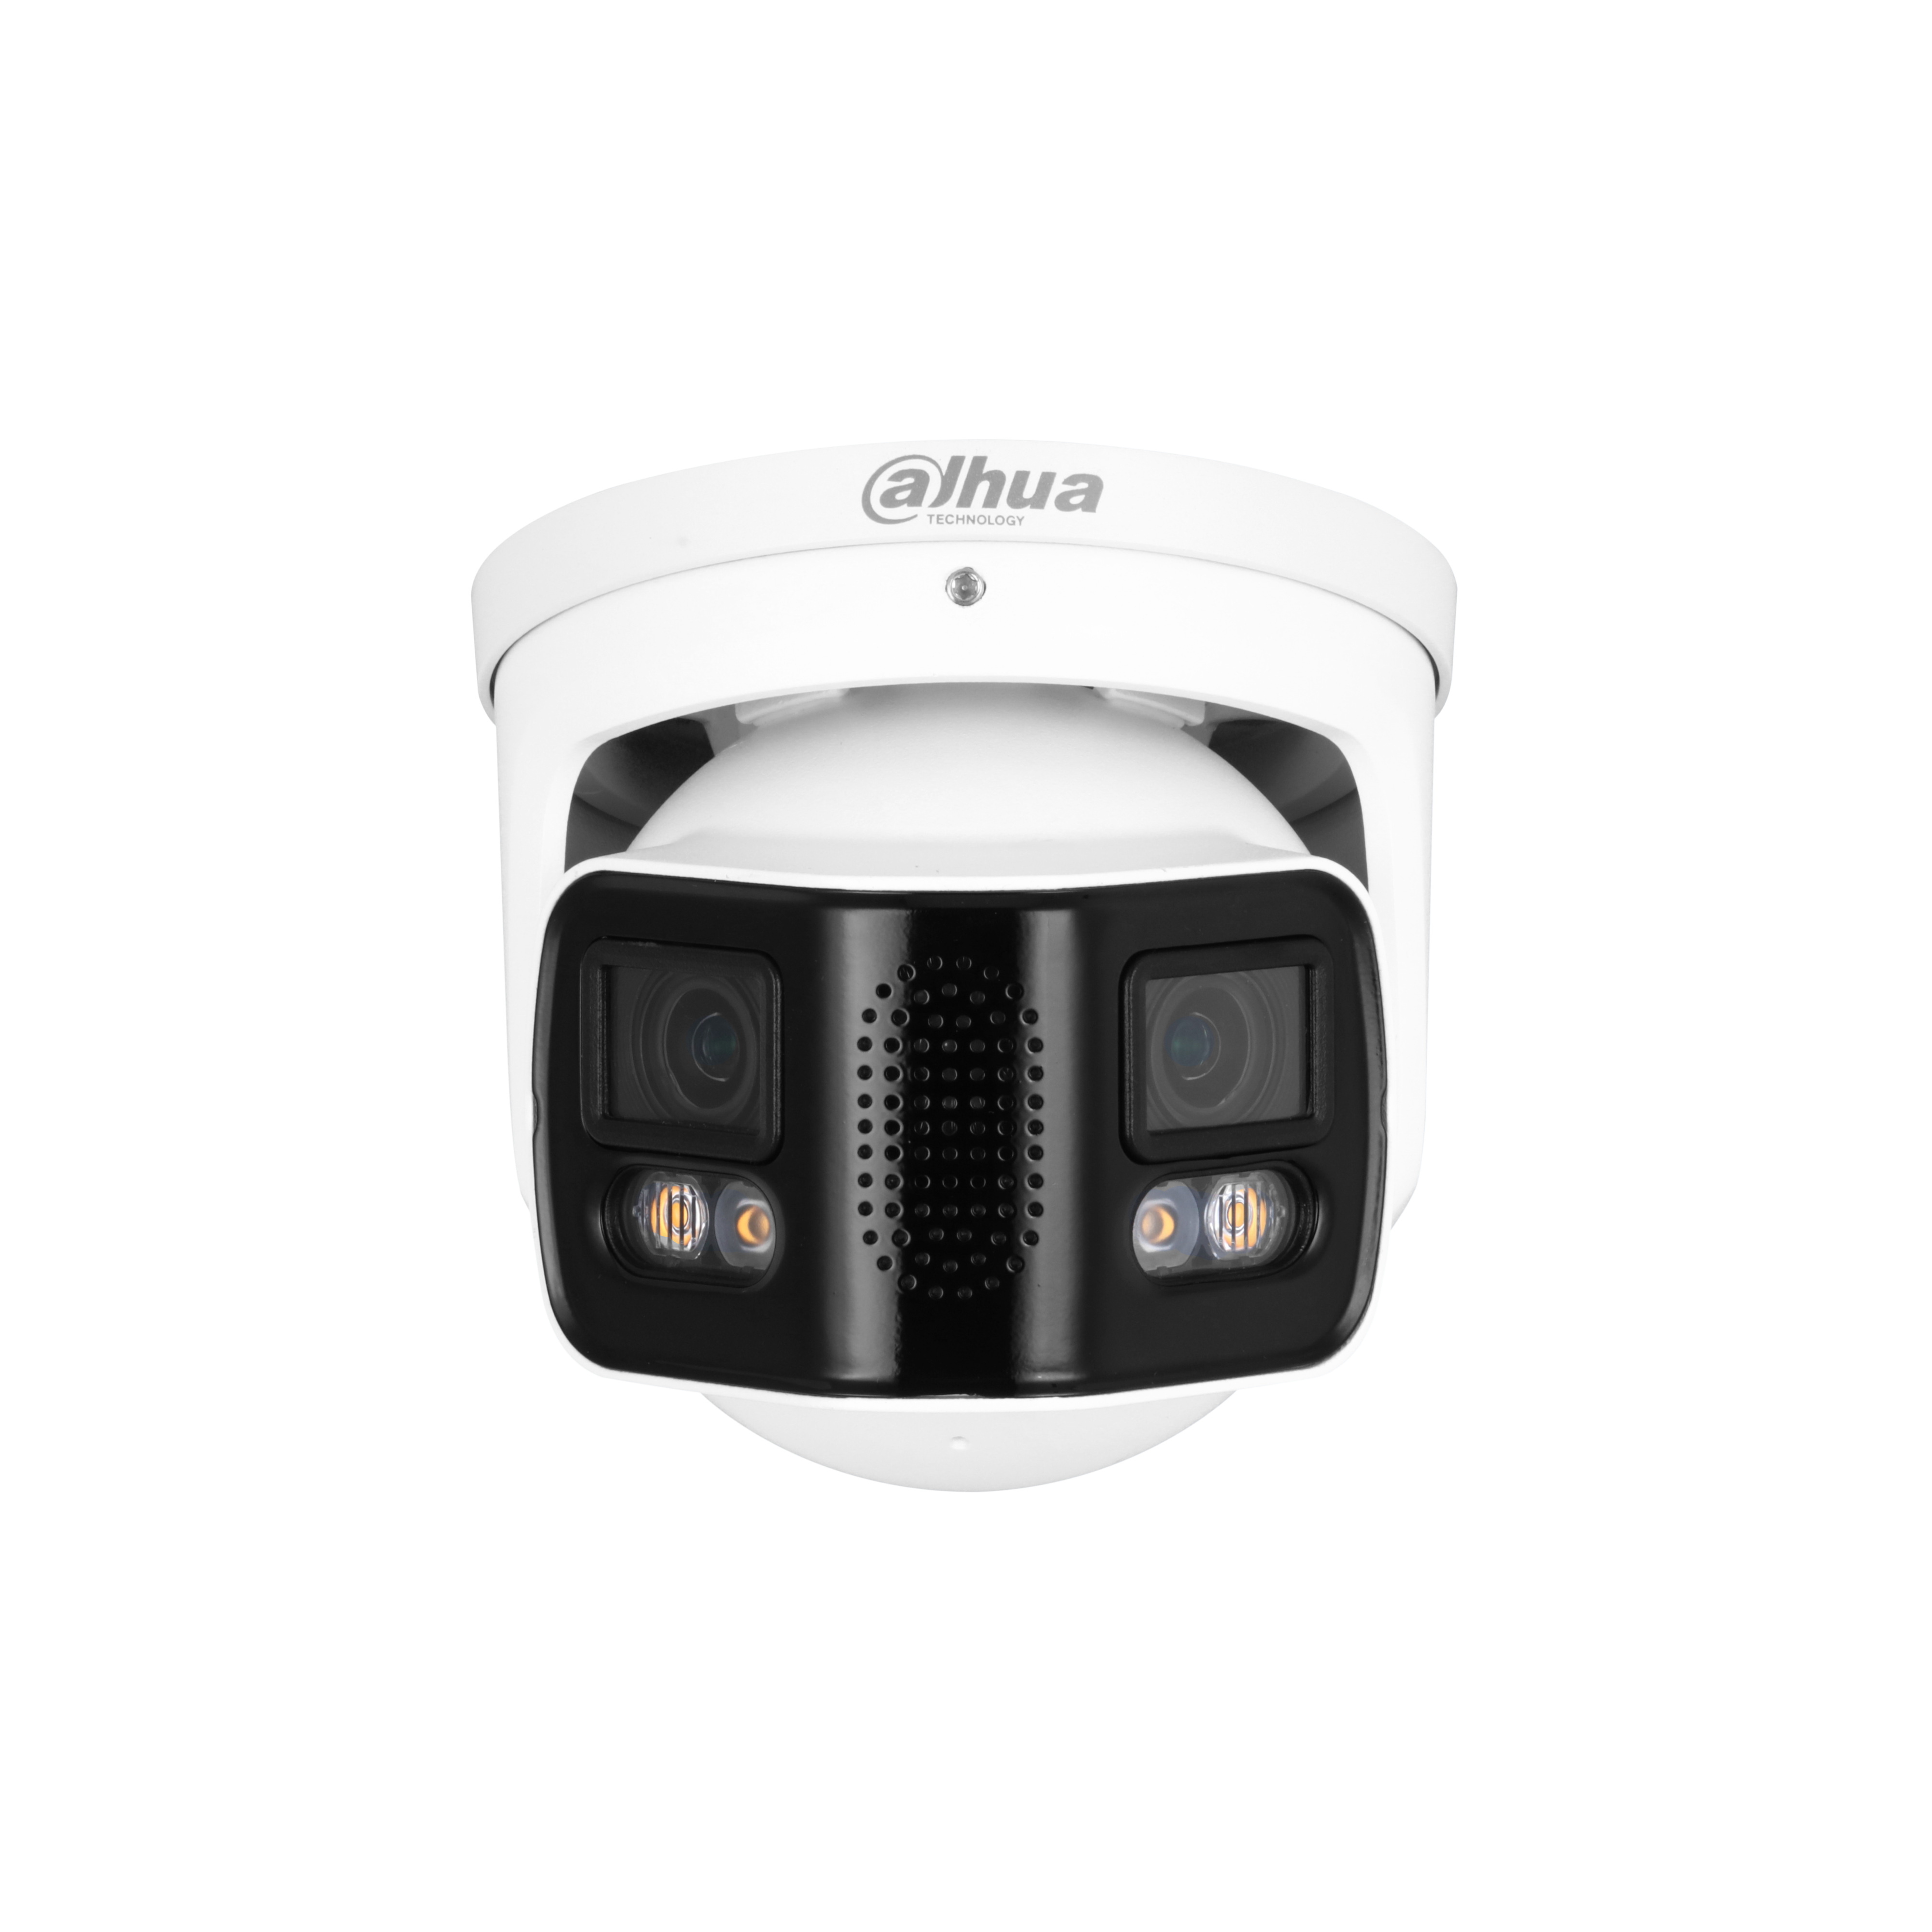 WIZMIND SERIES IP CAMERA WHITE AI 180° PEOPLE COUNT & EPTZ 2x4MP H.264/4+/5/5+ TURRET WITH DUAL LENS 140 TRUE WDR METAL 3.6MMFIXED LENS FULL COLOUR WARM LED 40M POE+/ EPOE IP67 BUILT IN MIC AUDIO IN AUDIO OUT 1 x ALARM IN 1 x ALARM OUT SUPPORT UP TO 512GB SD 12VDC